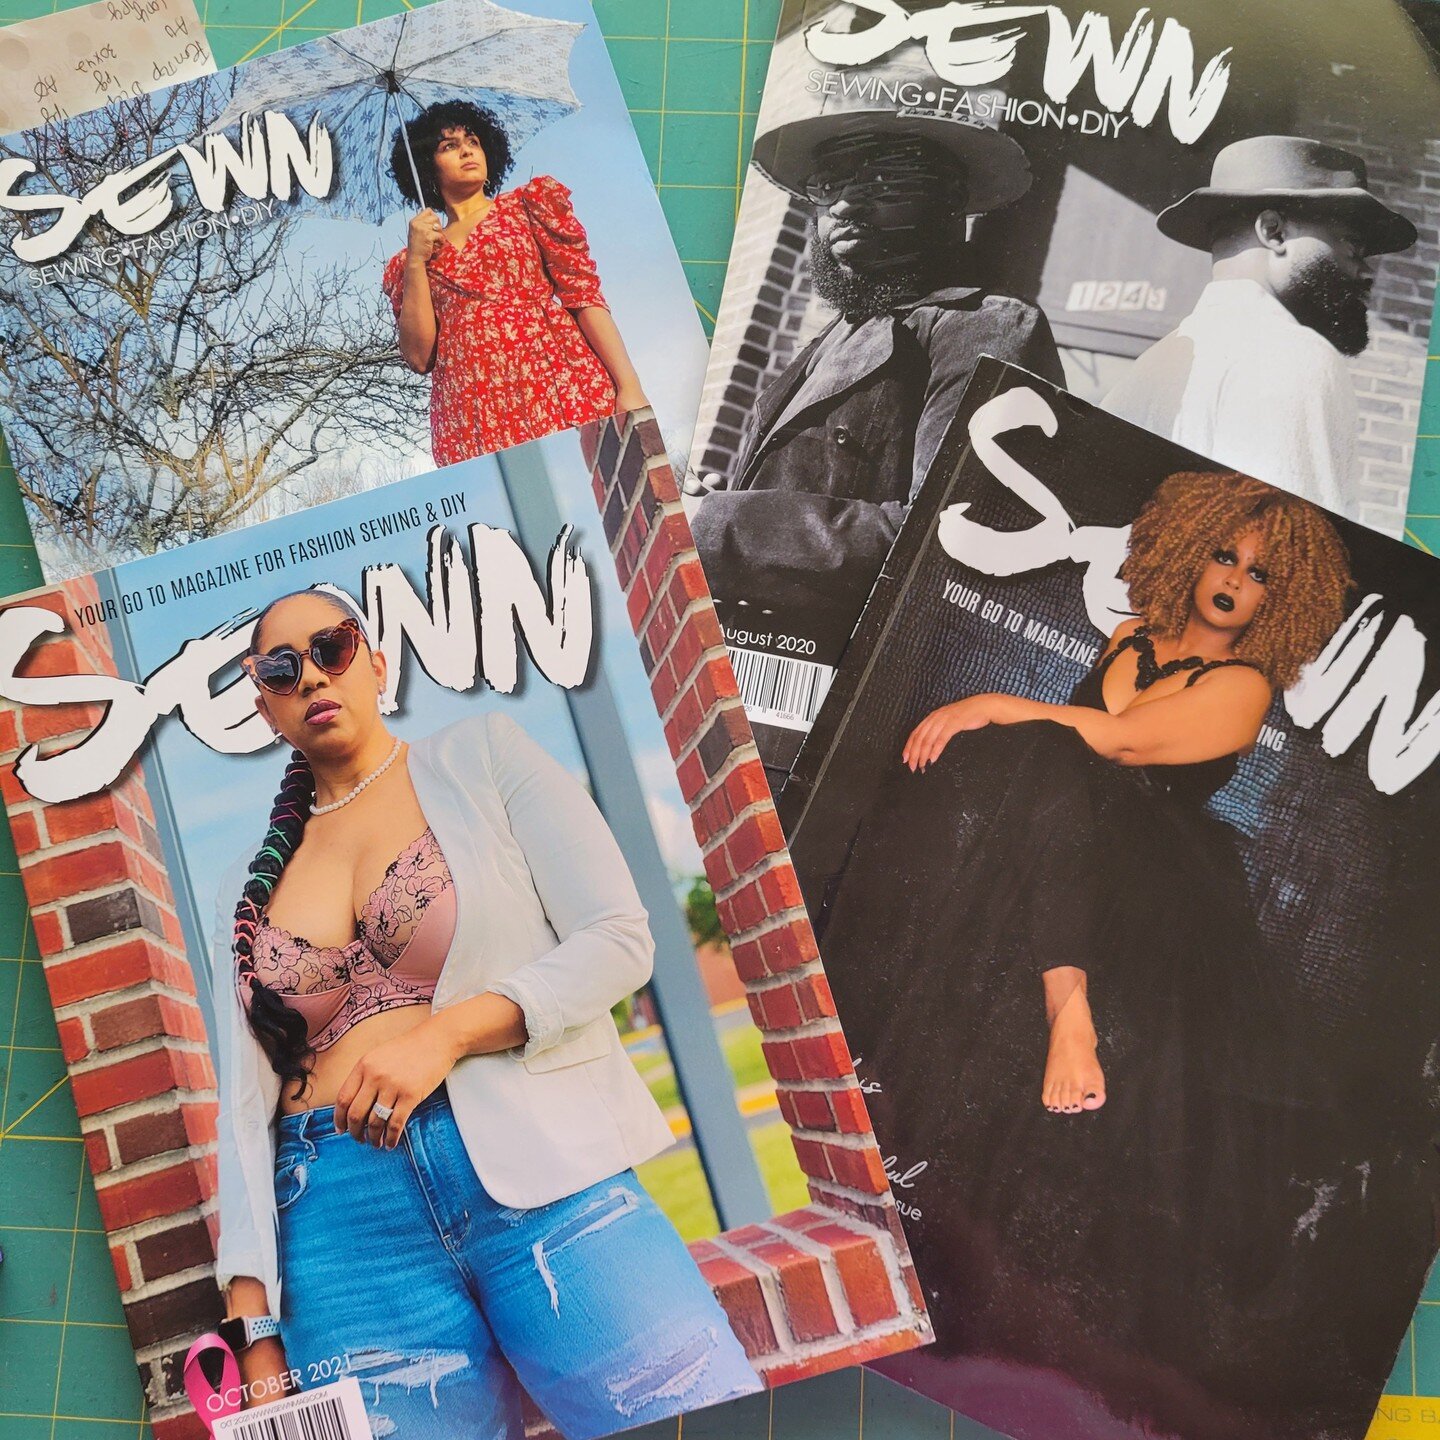 Where do you get your inspiration? Pinterest, Instagram are all great places, but raise your hand 🖐 if you appreciate a GOOD magazine! @sewnmagazine has SOOO much inspiration and gives me ideas for stepping outside the box (which you all know I'm ma